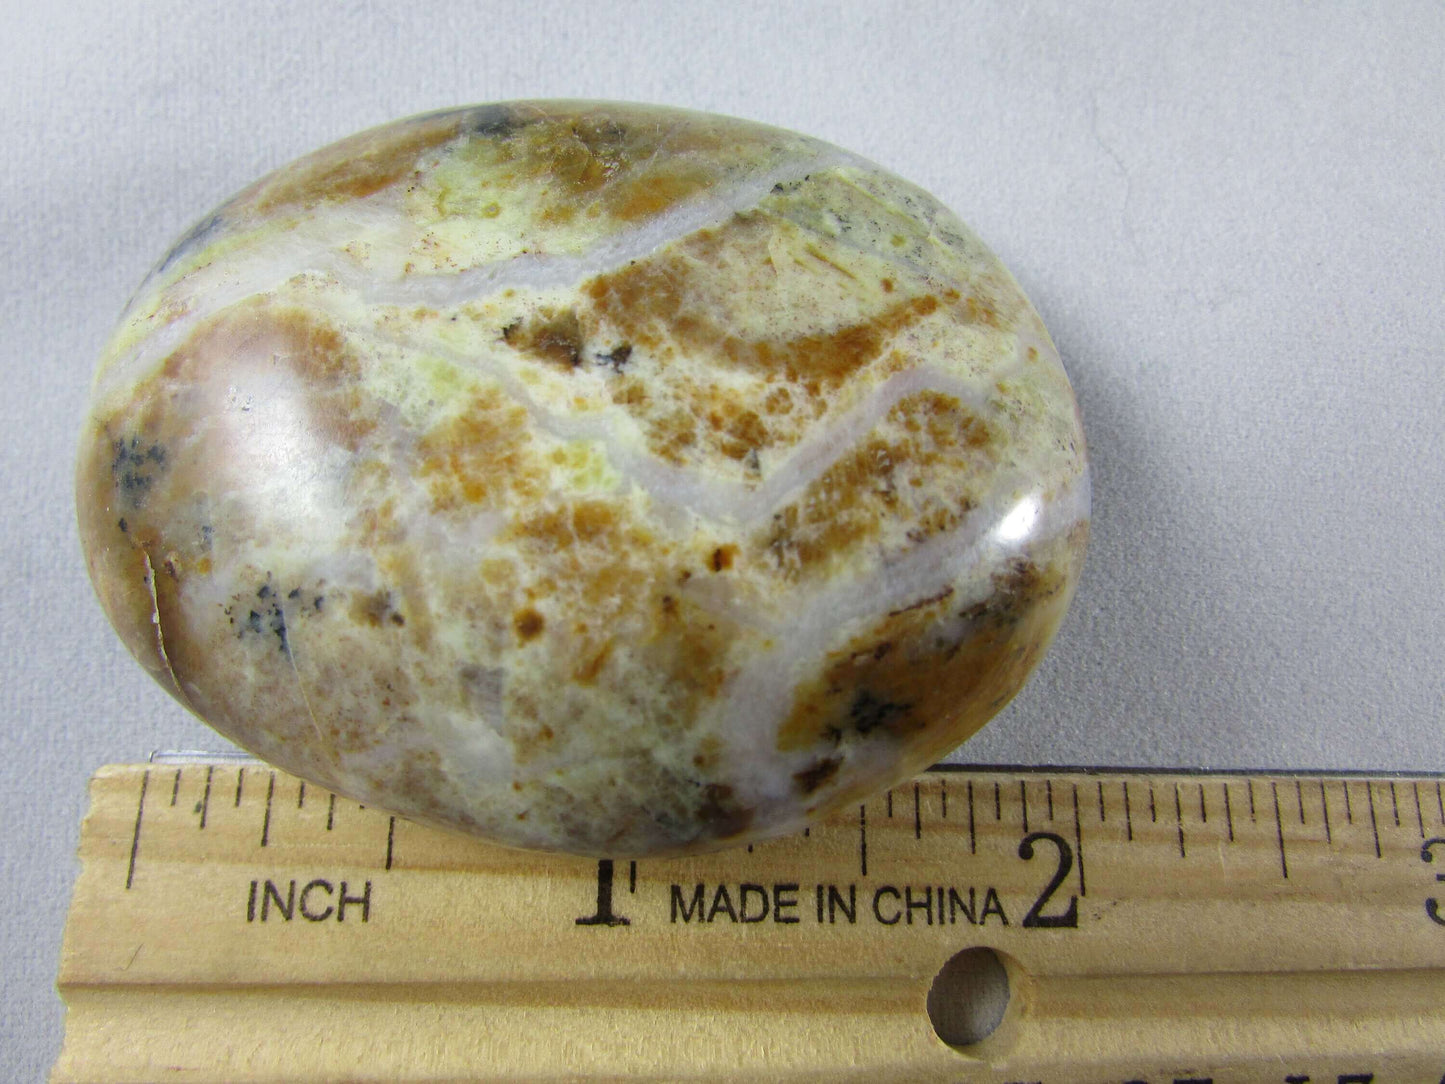 Natural Polished Green Opal Palmstone, Ethically Sourced from Madagascar